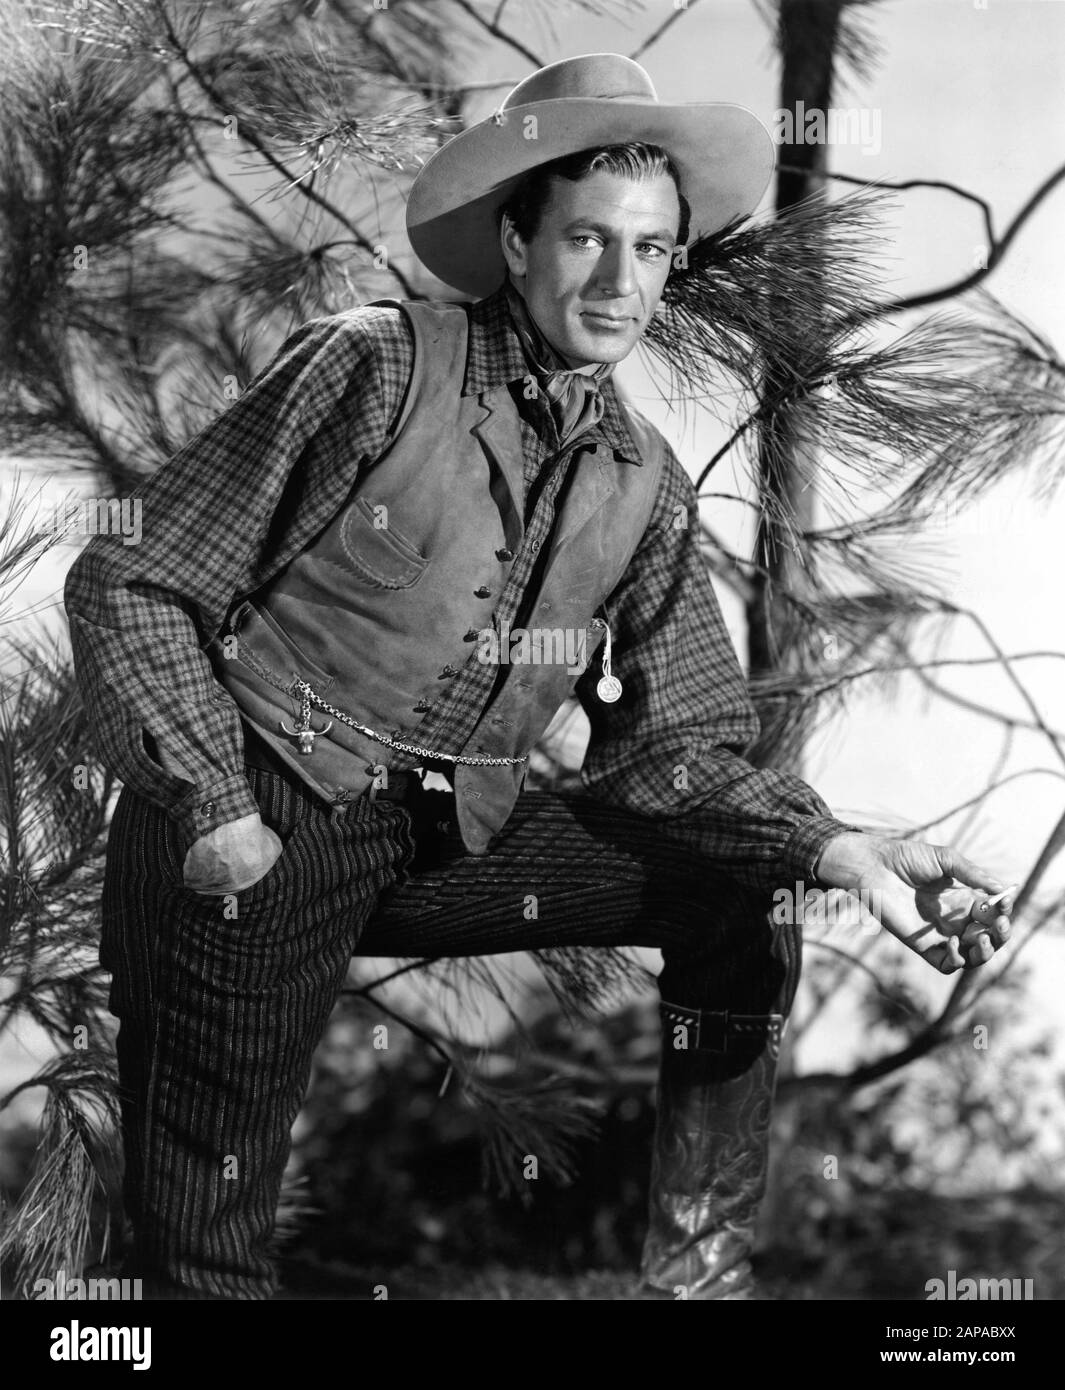 Gary COOPER Publicity Portrait AS Texas Ranger Dusty Rivers in NORTH WEST MOUNTED POLICE 1940 Director CECIL B. De MILLE Paramount Pictures Stockfoto